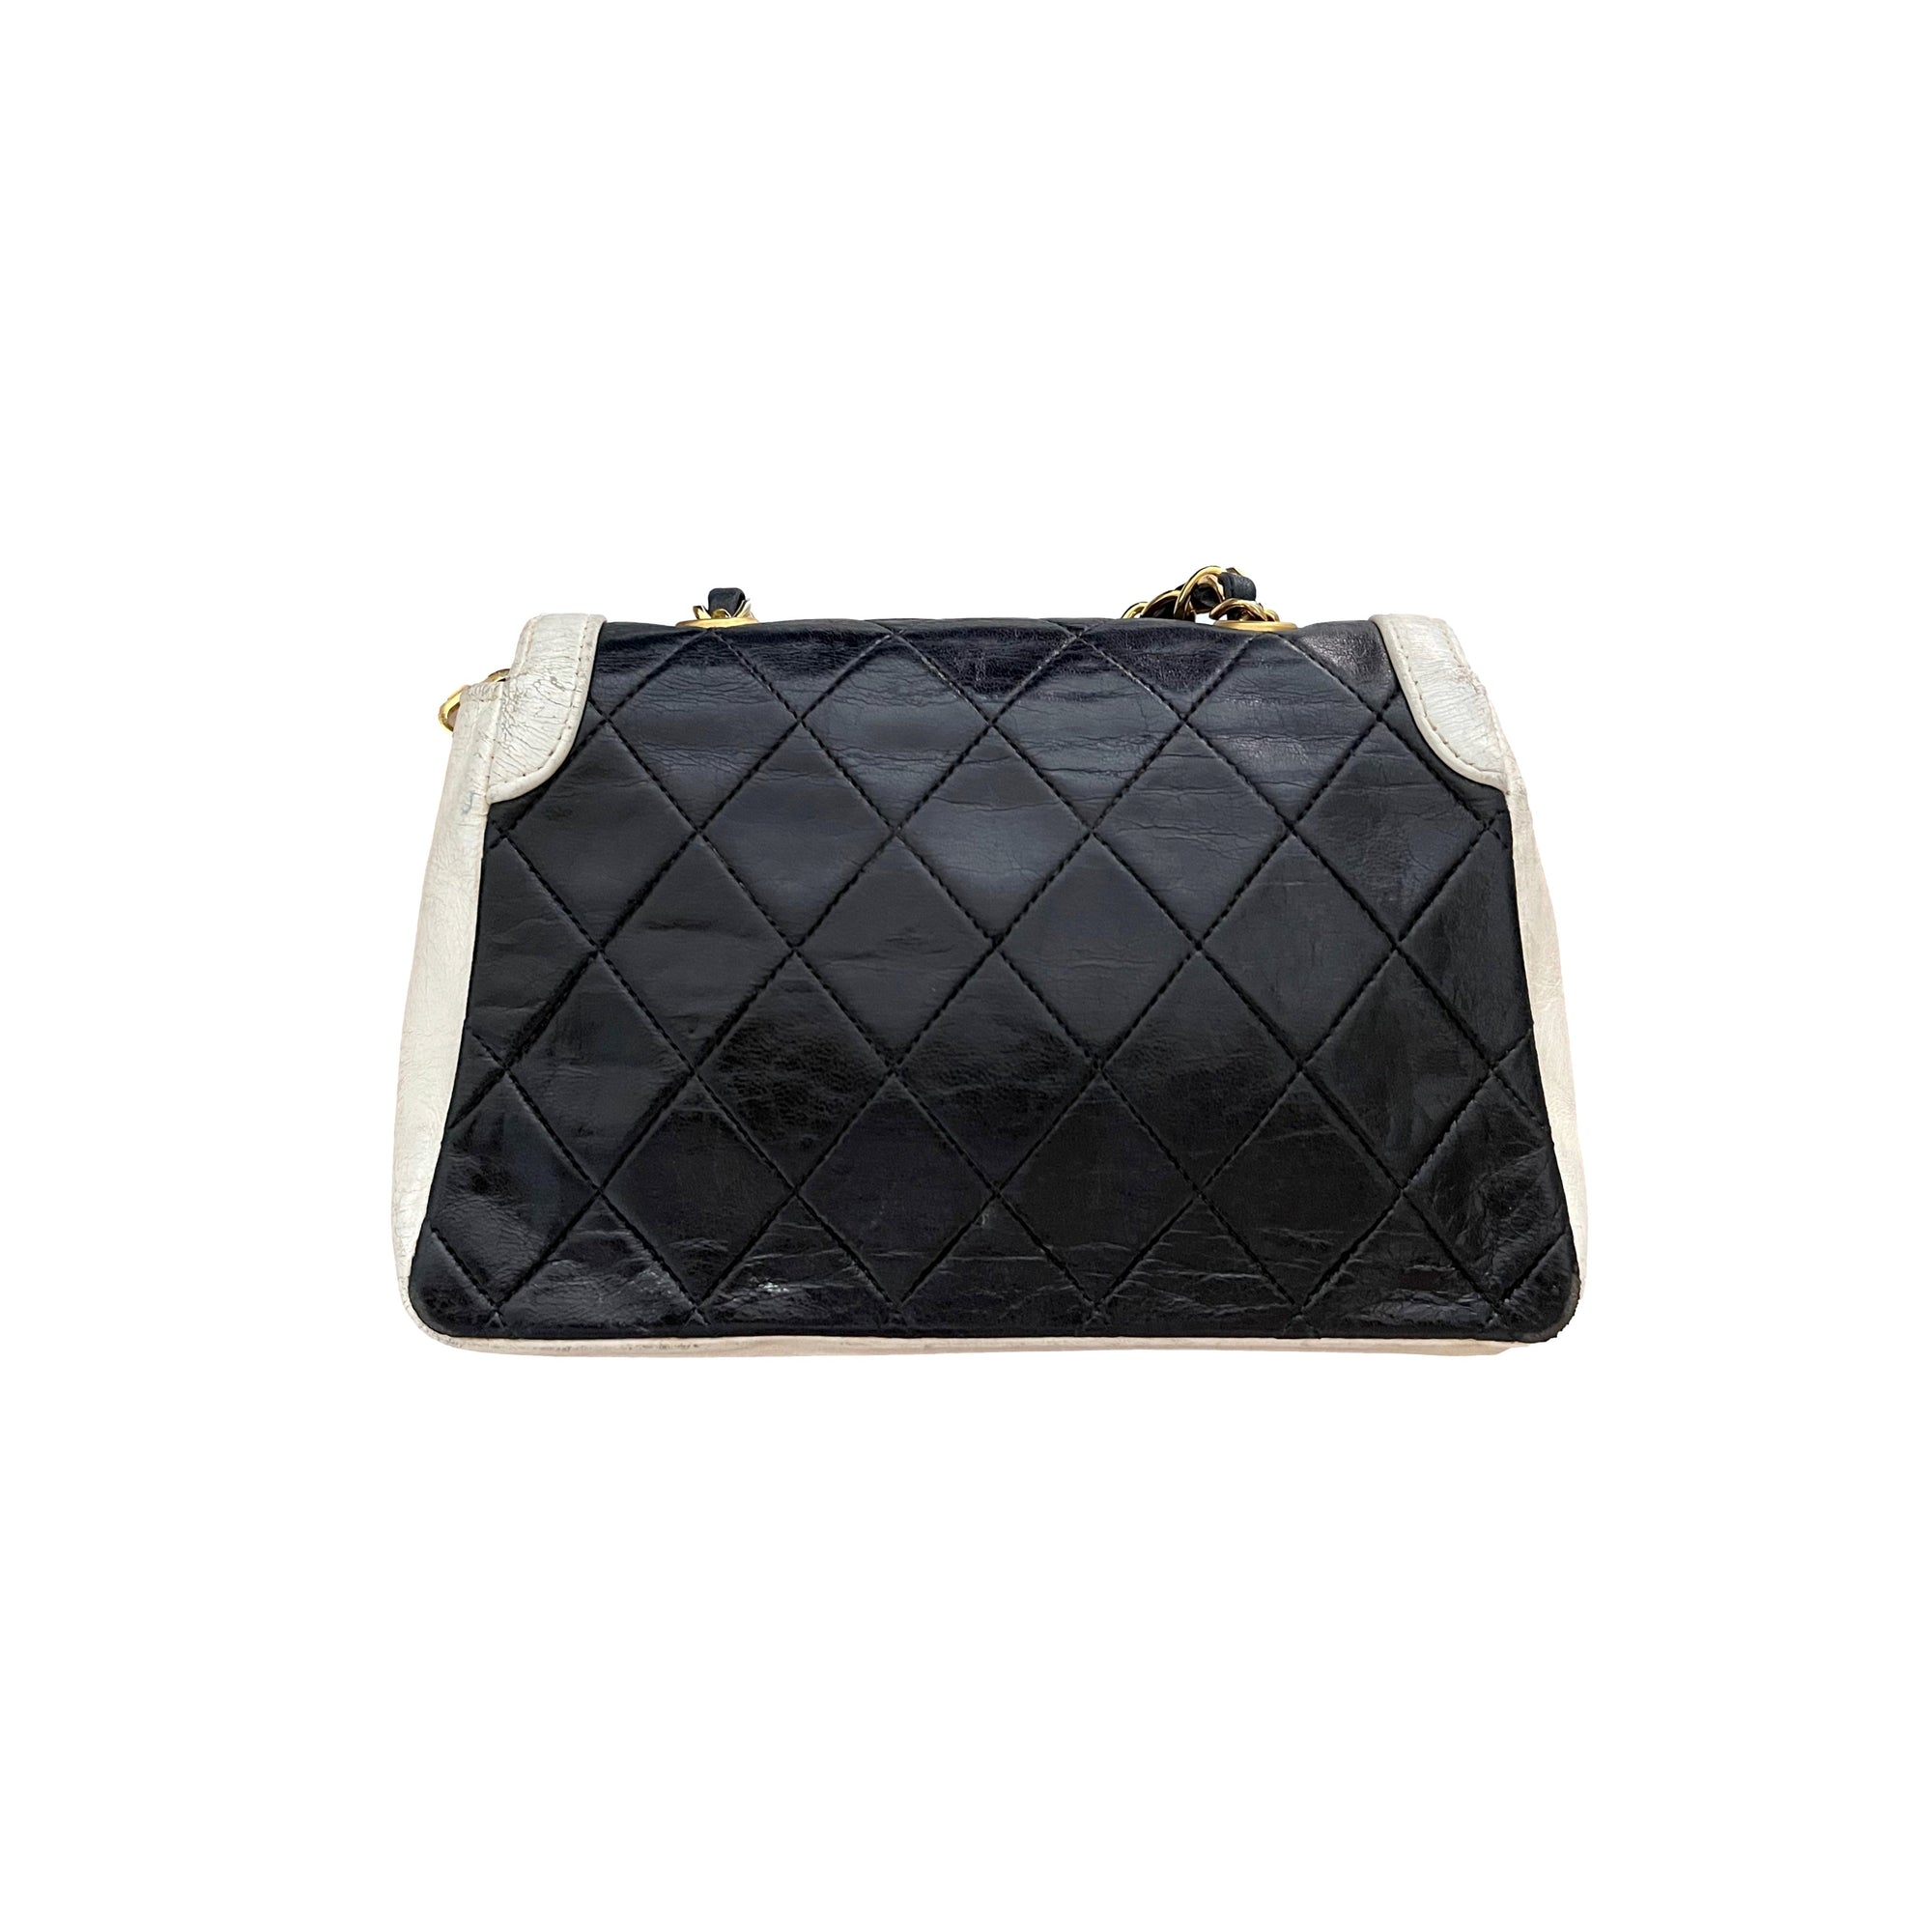 Chanel Two Tone Small Flap Bag